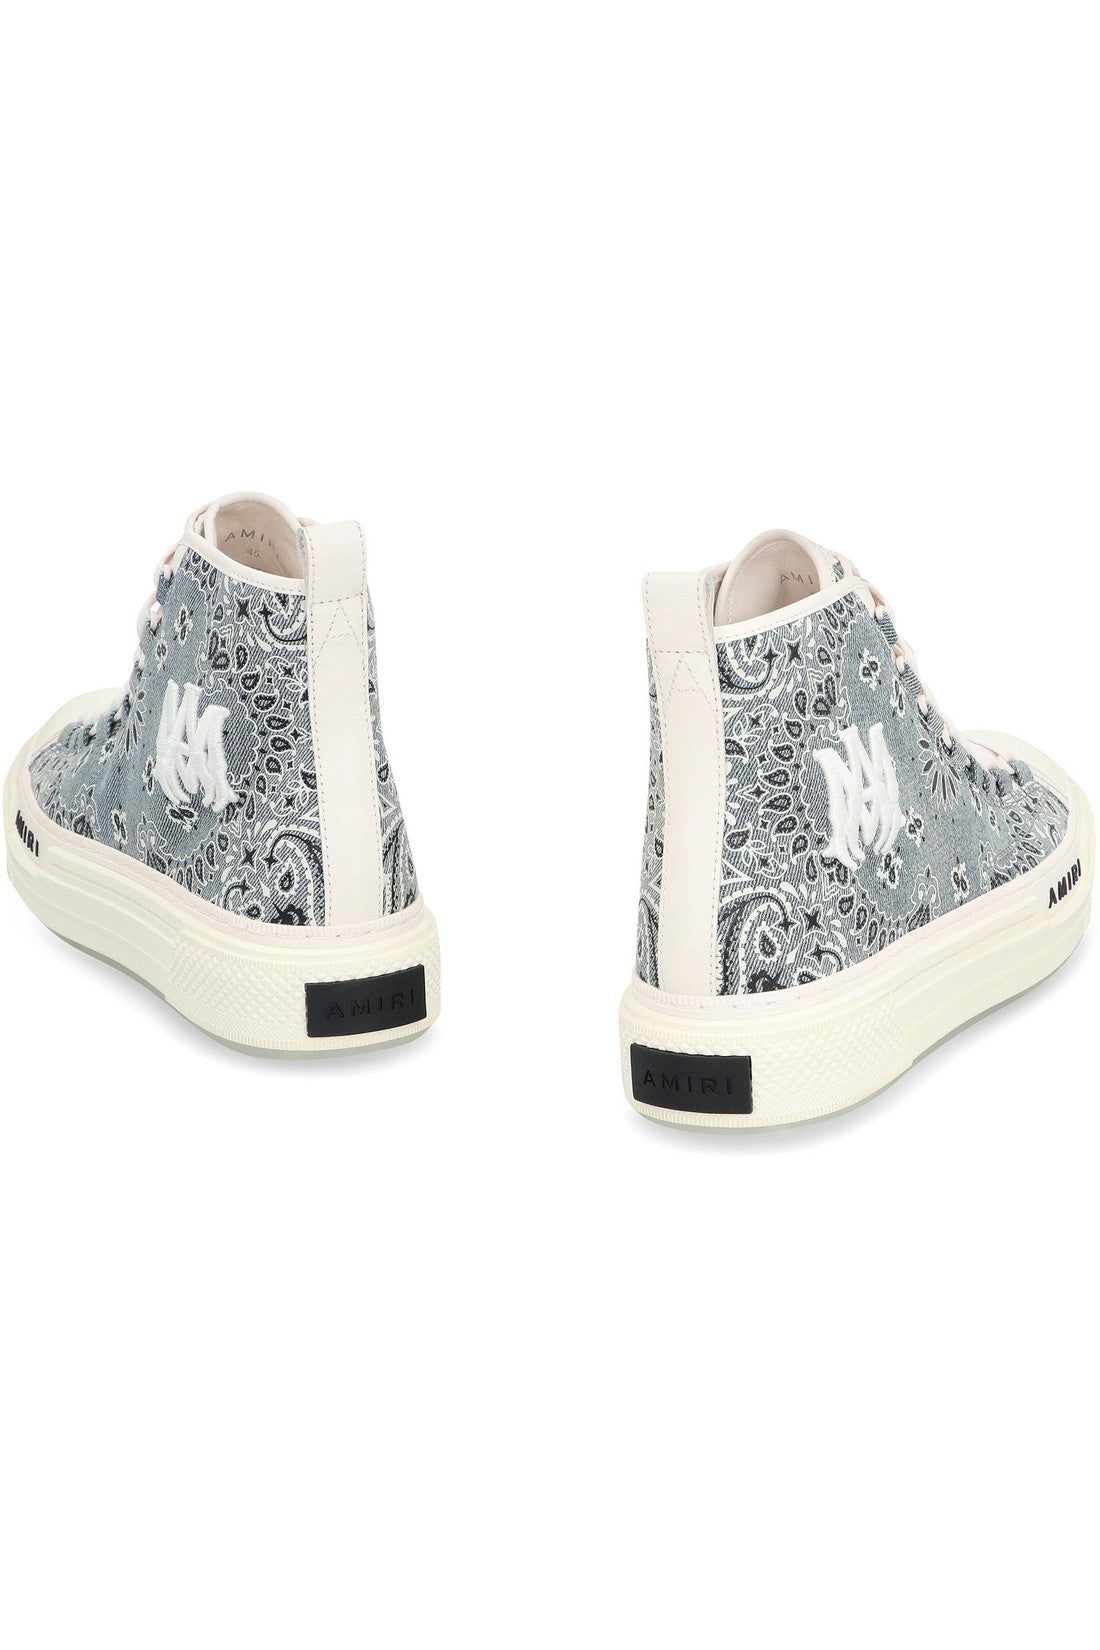 AMIRI-OUTLET-SALE-Court high-top sneakers-ARCHIVIST